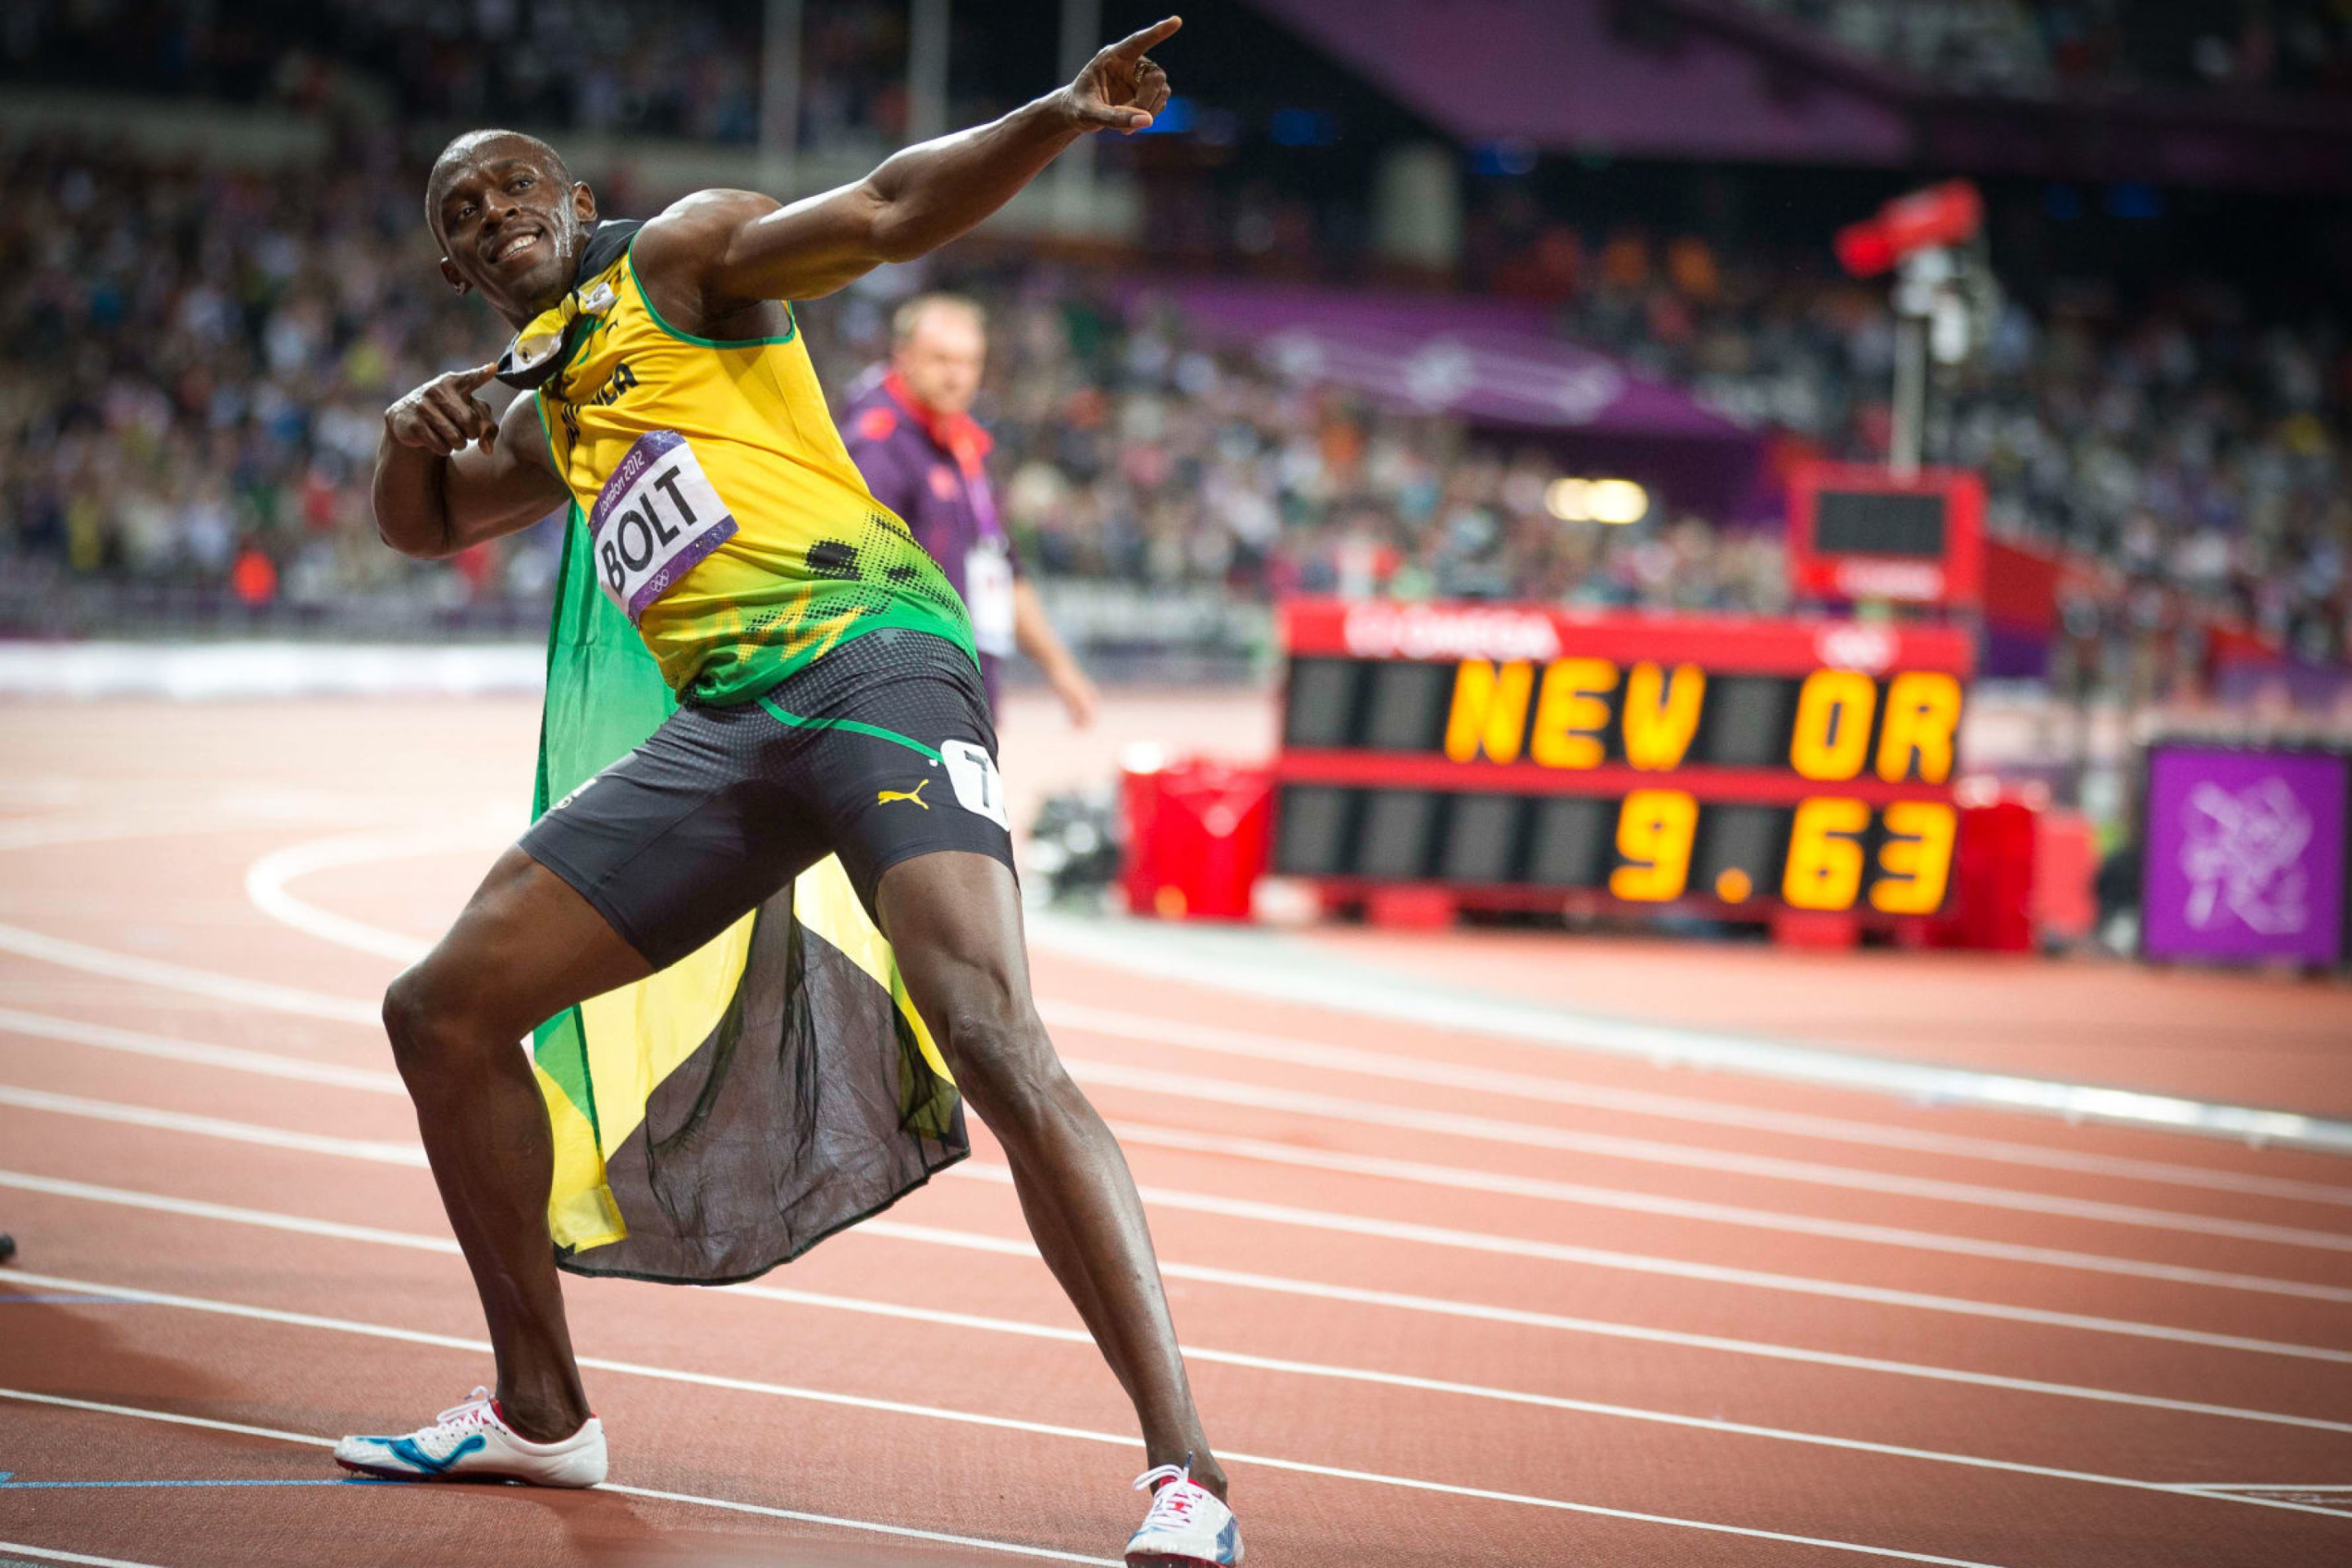 Das Usain Bolt won medals in the Olympics Wallpaper 2880x1920